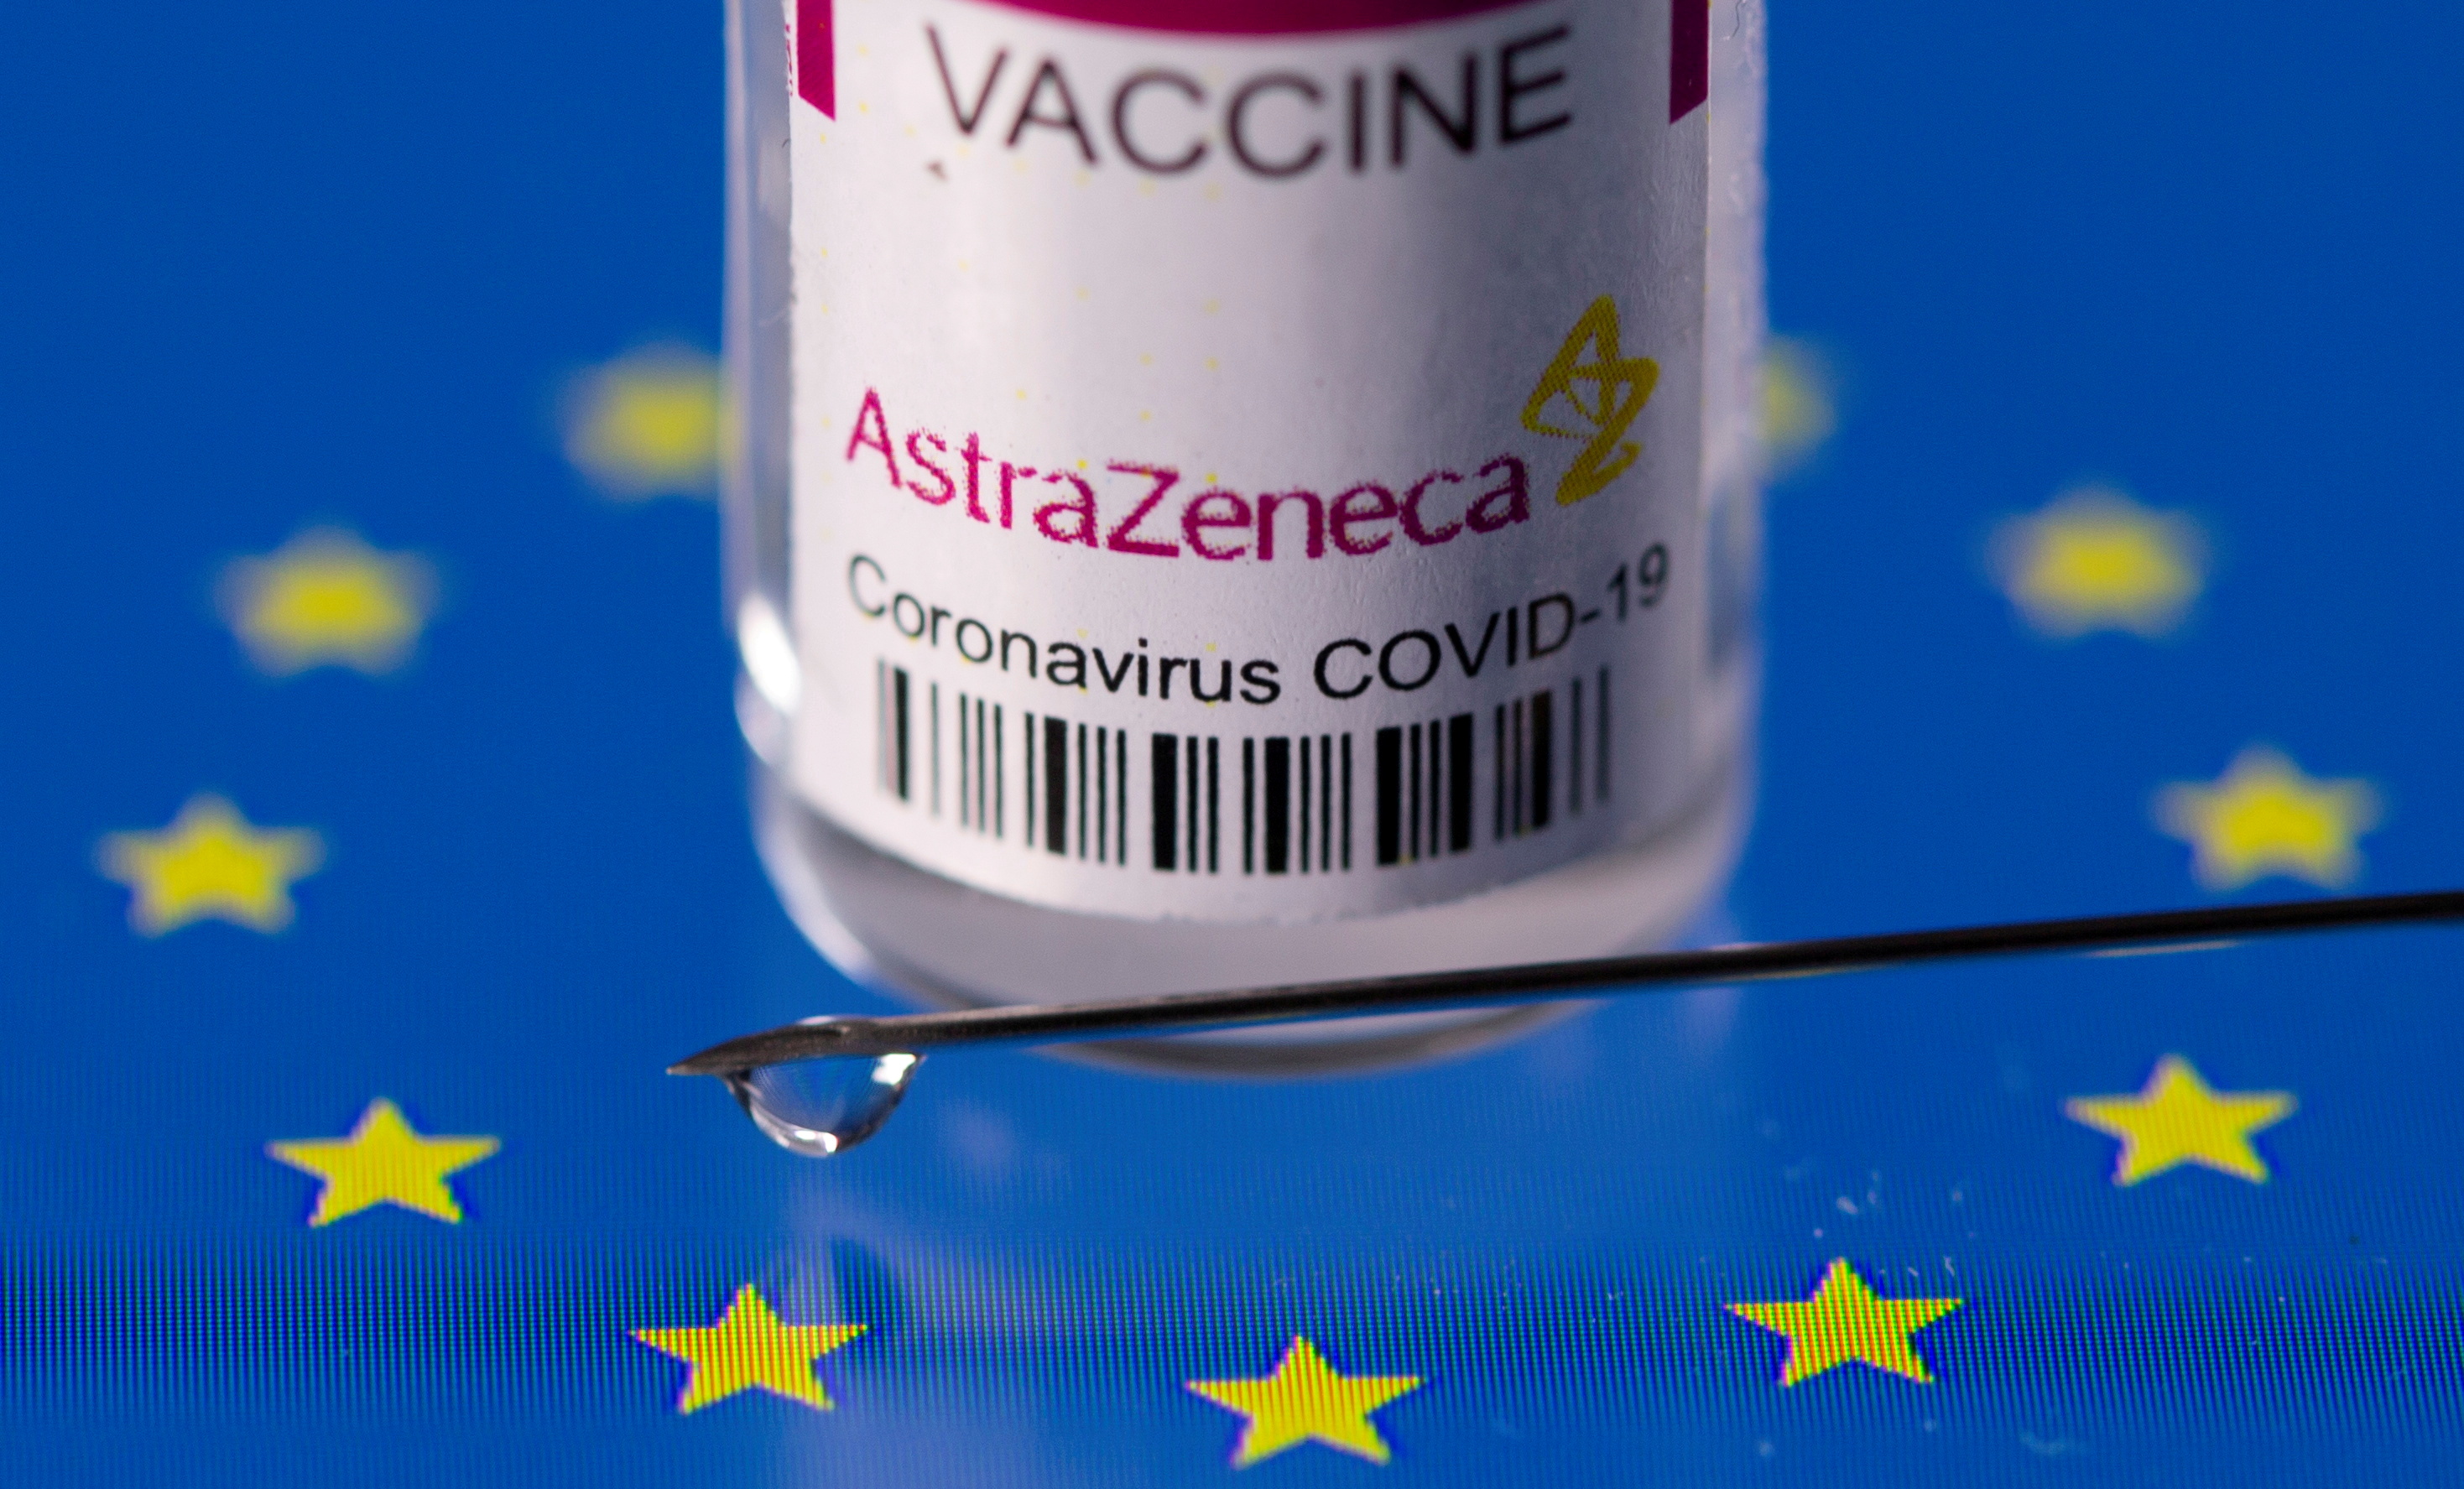 Vial labelled "AstraZeneca coronavirus disease (COVID-19) vaccine" placed on displayed EU flag is seen in this illustration picture